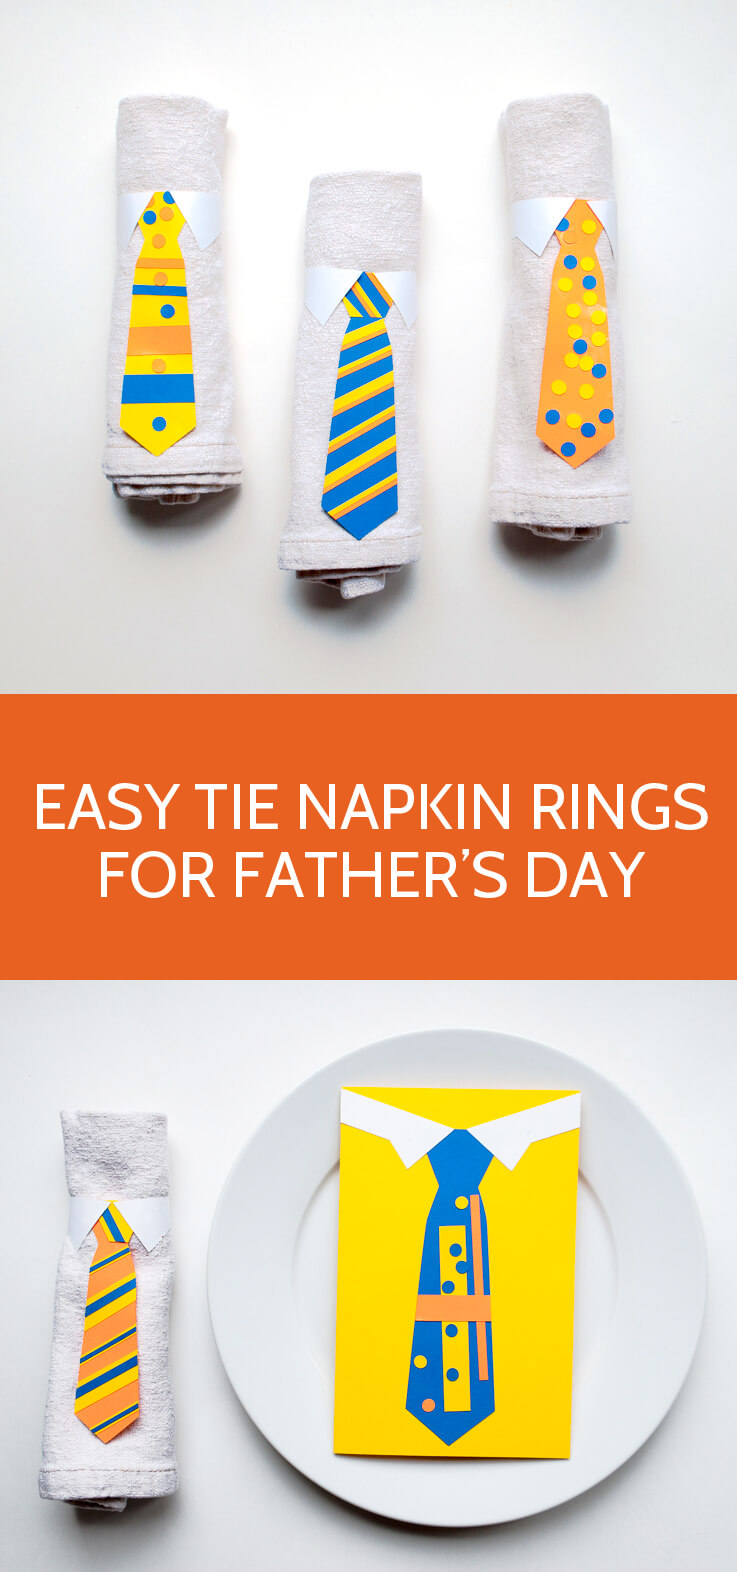 DIY Tie Napkin Rings Kid's Activity for Father's Day #colorize #ad